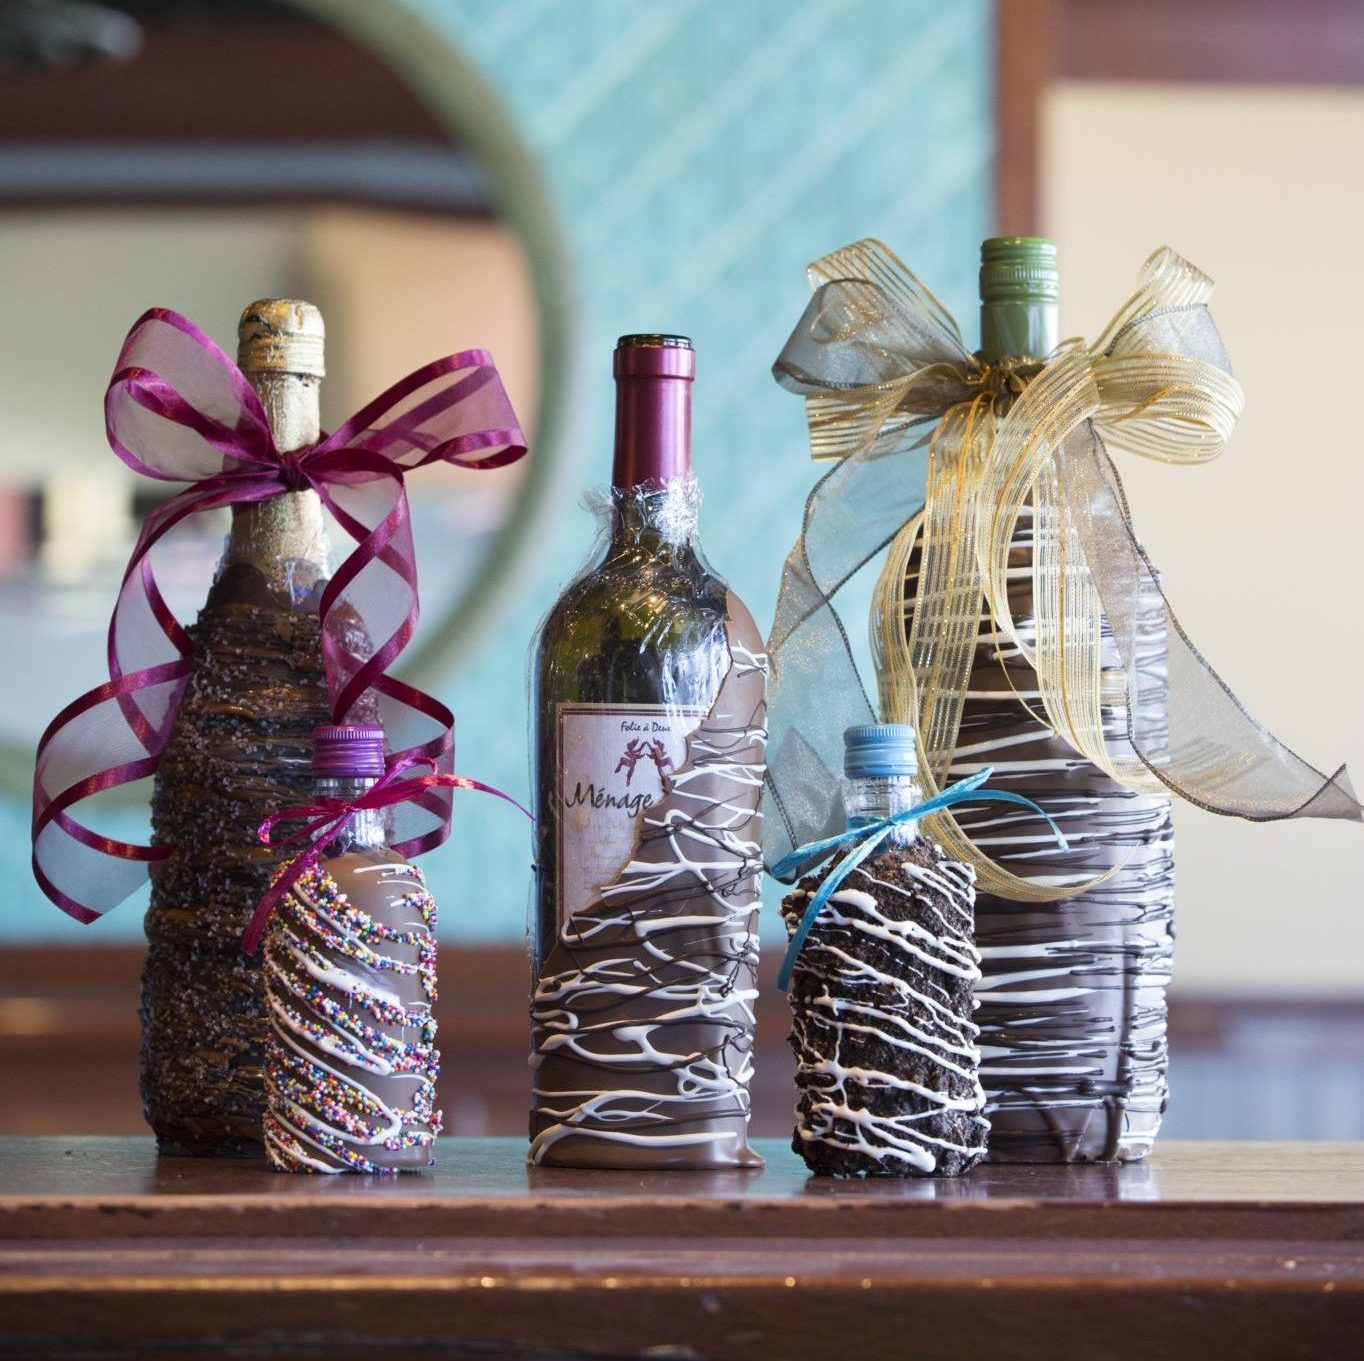 A display of chocolate dipped wine bottles from Jenkinson's Sweet Shop.